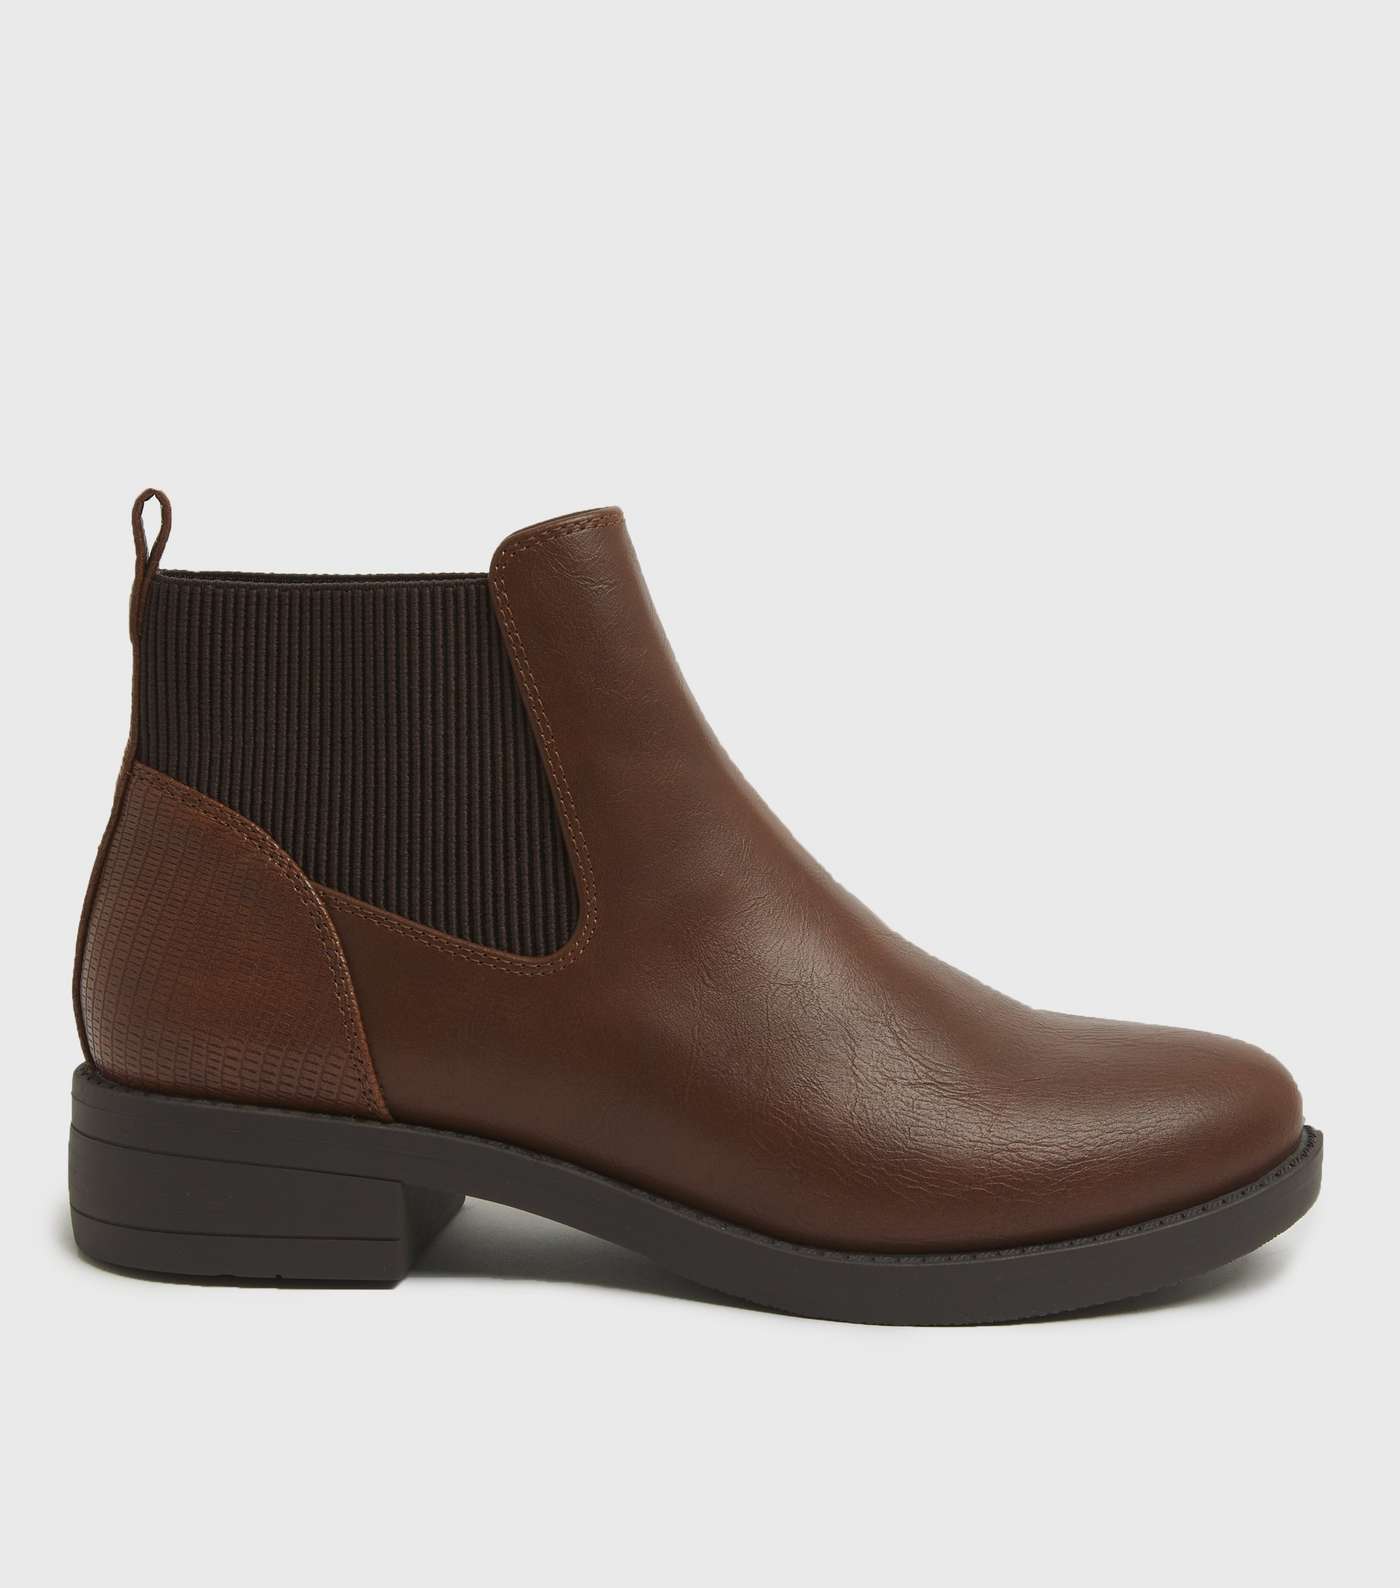 Tan Round Toe Chelsea Boots